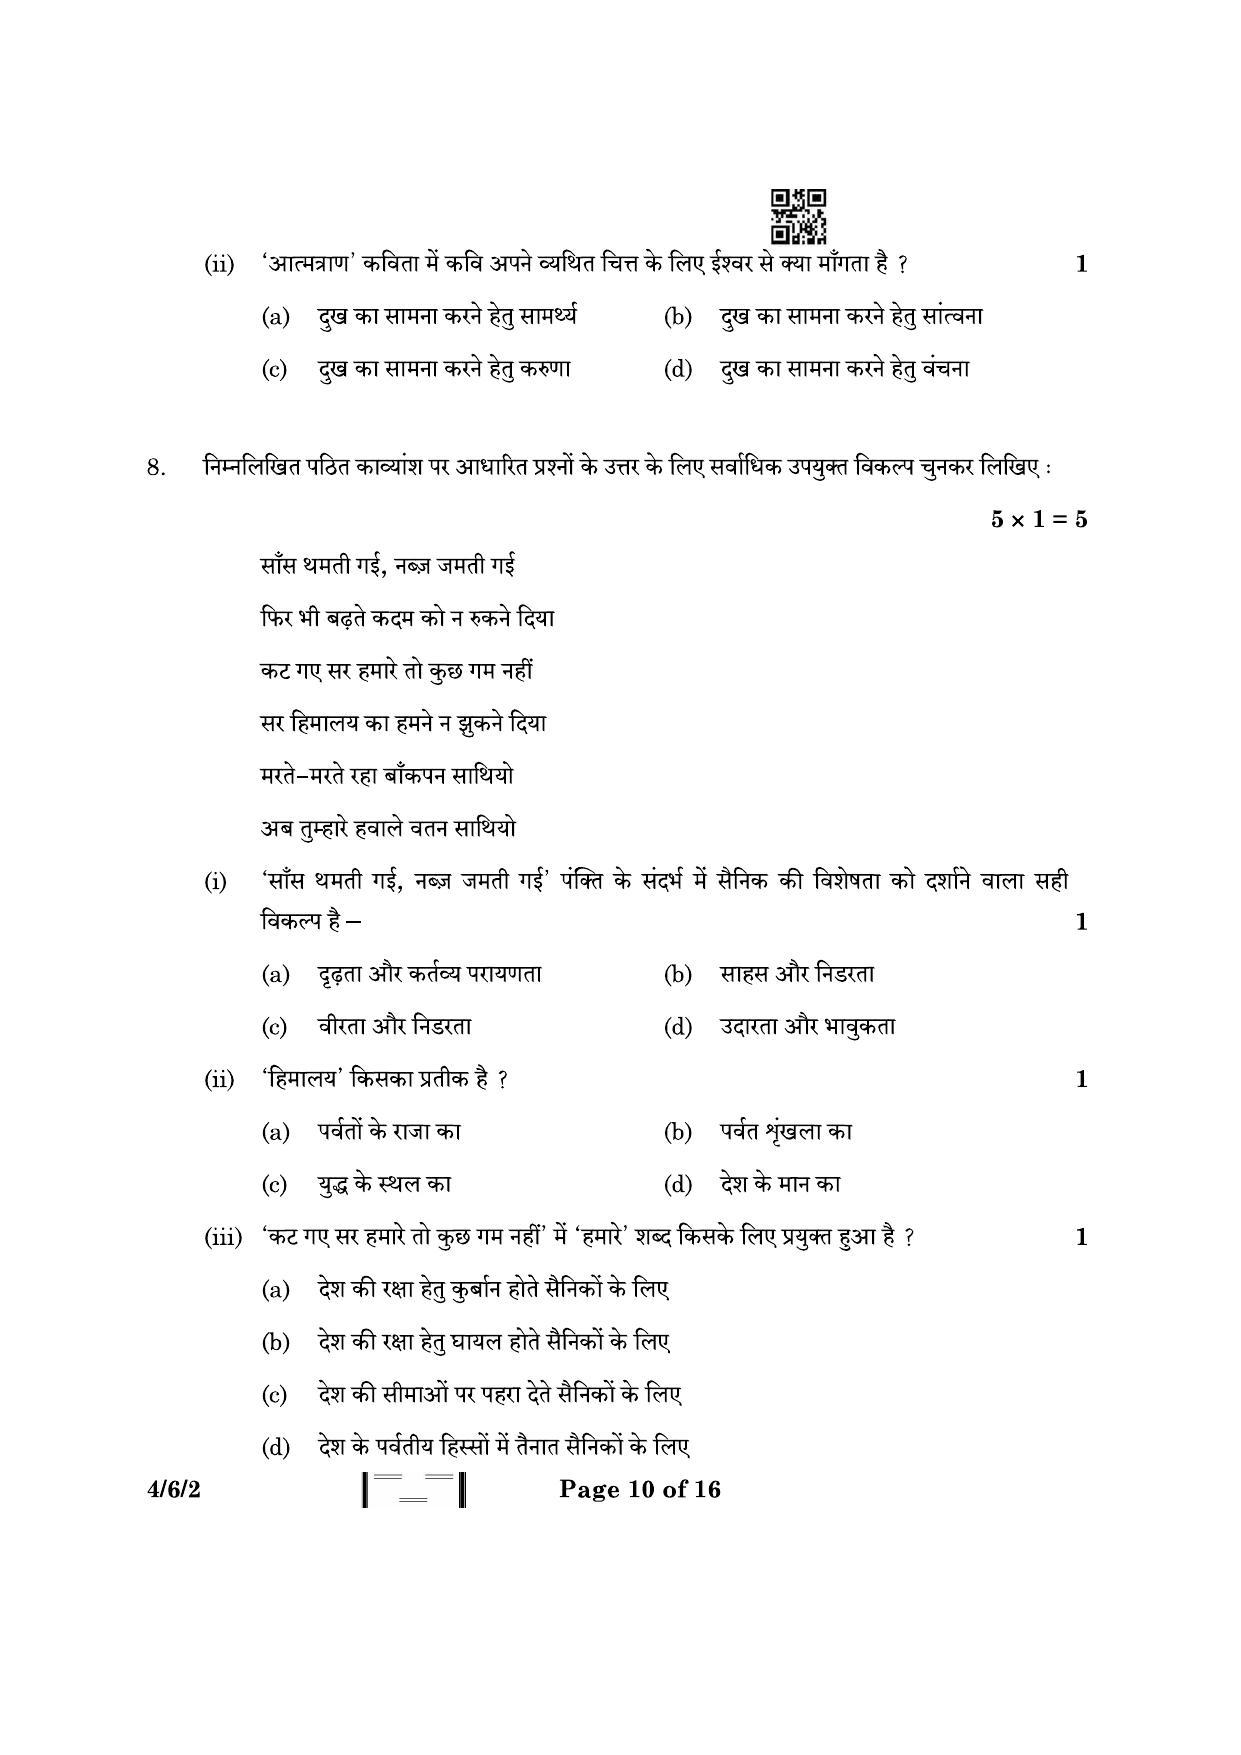 CBSE Class 10 4-6-2 Hindi B 2023 Question Paper - Page 10